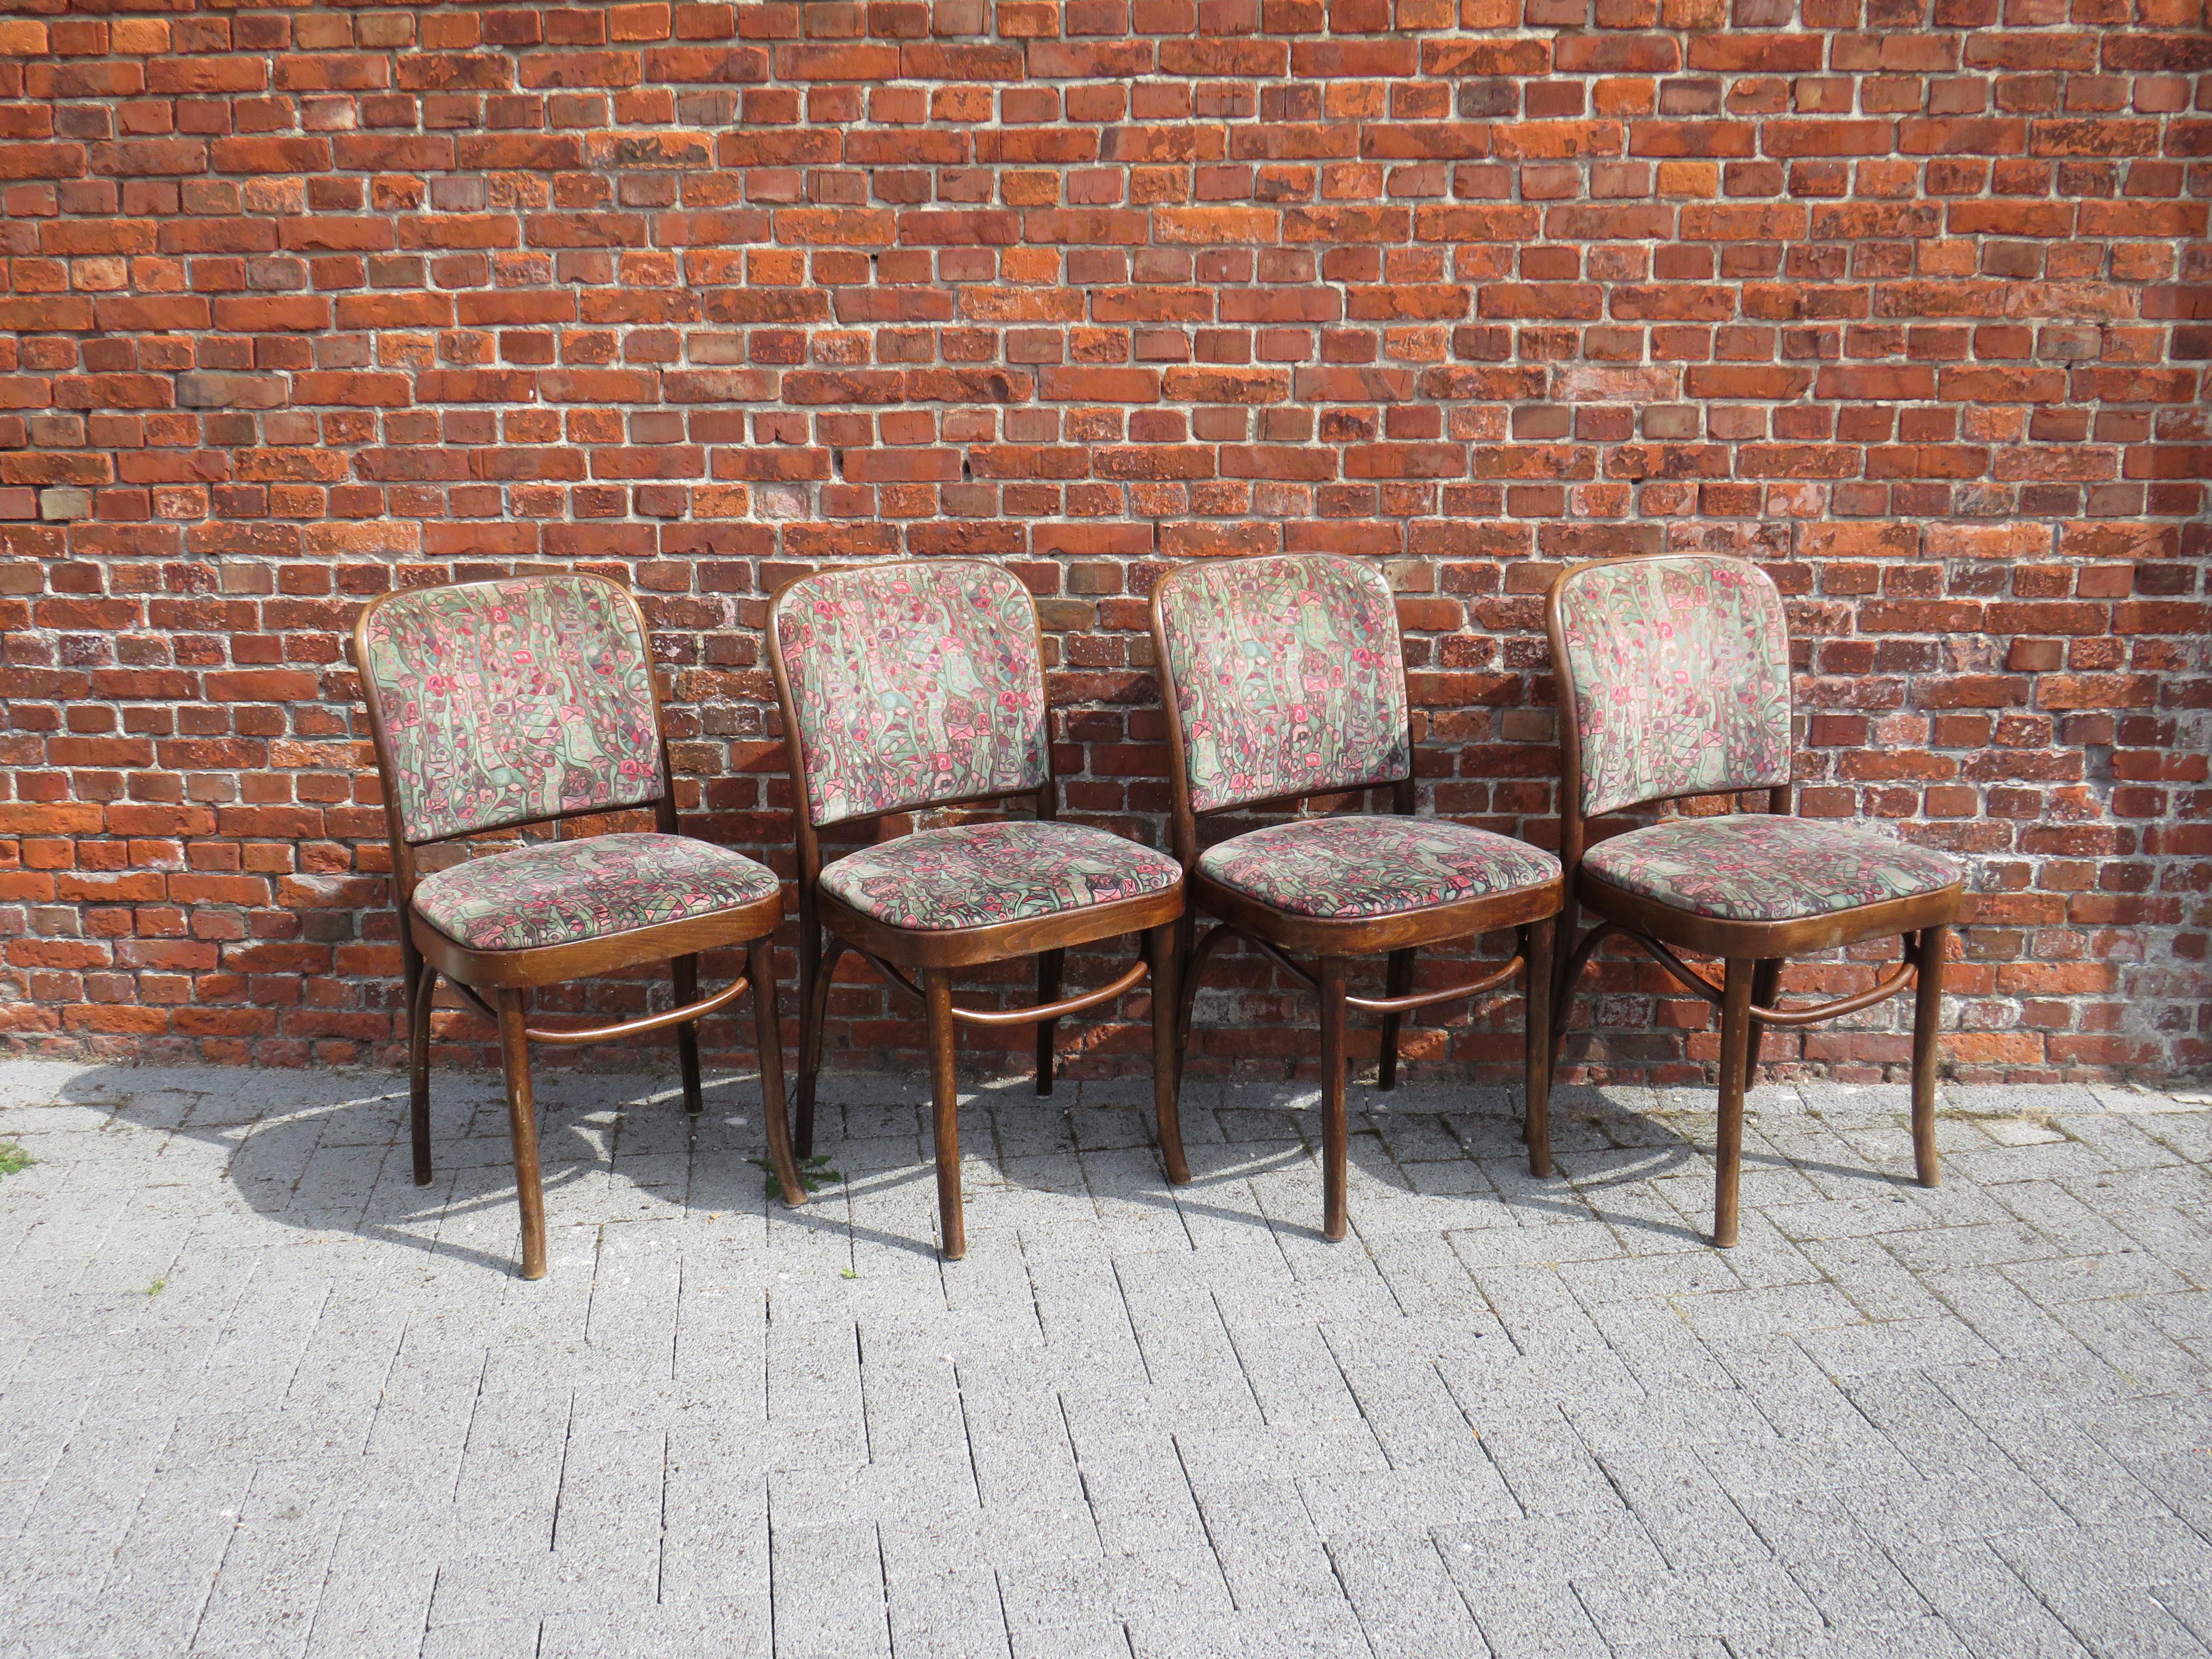 Polish 4 Thonet Chairs, Model Prague No. 811, First Half of the 20th Century For Sale